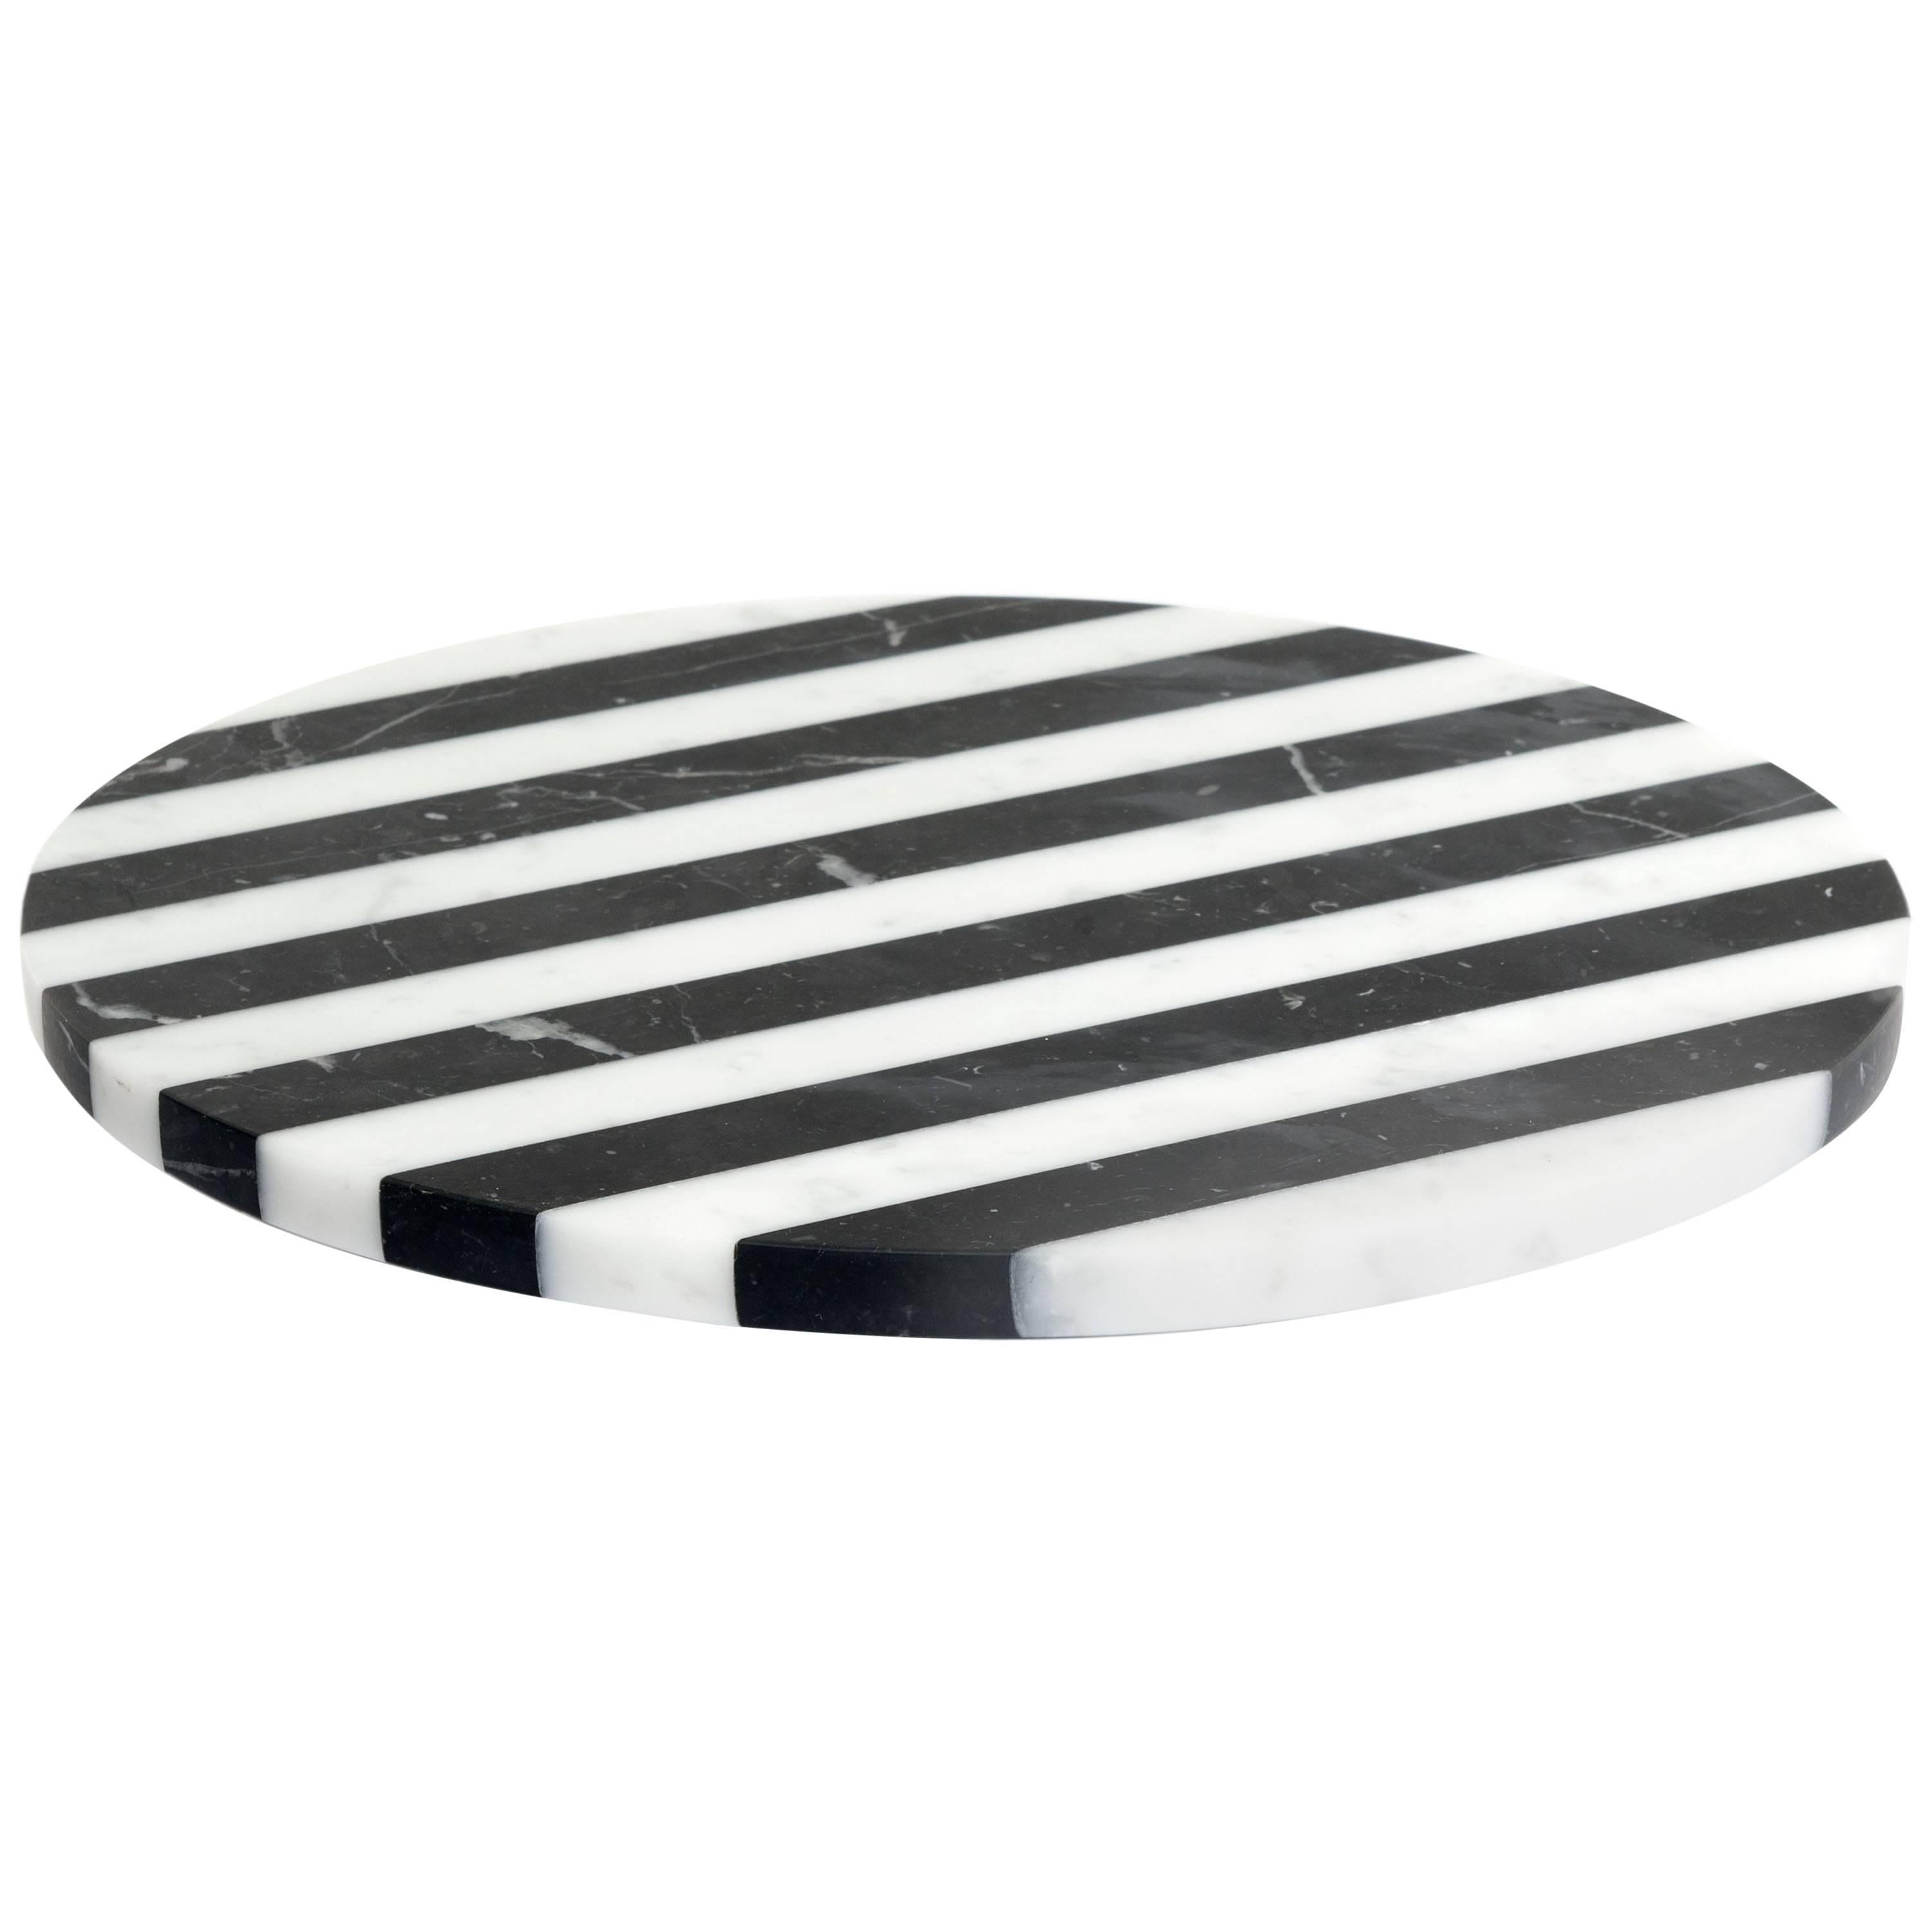 Alice Cake Stand M, by Bethan Gray for Editions Milano For Sale